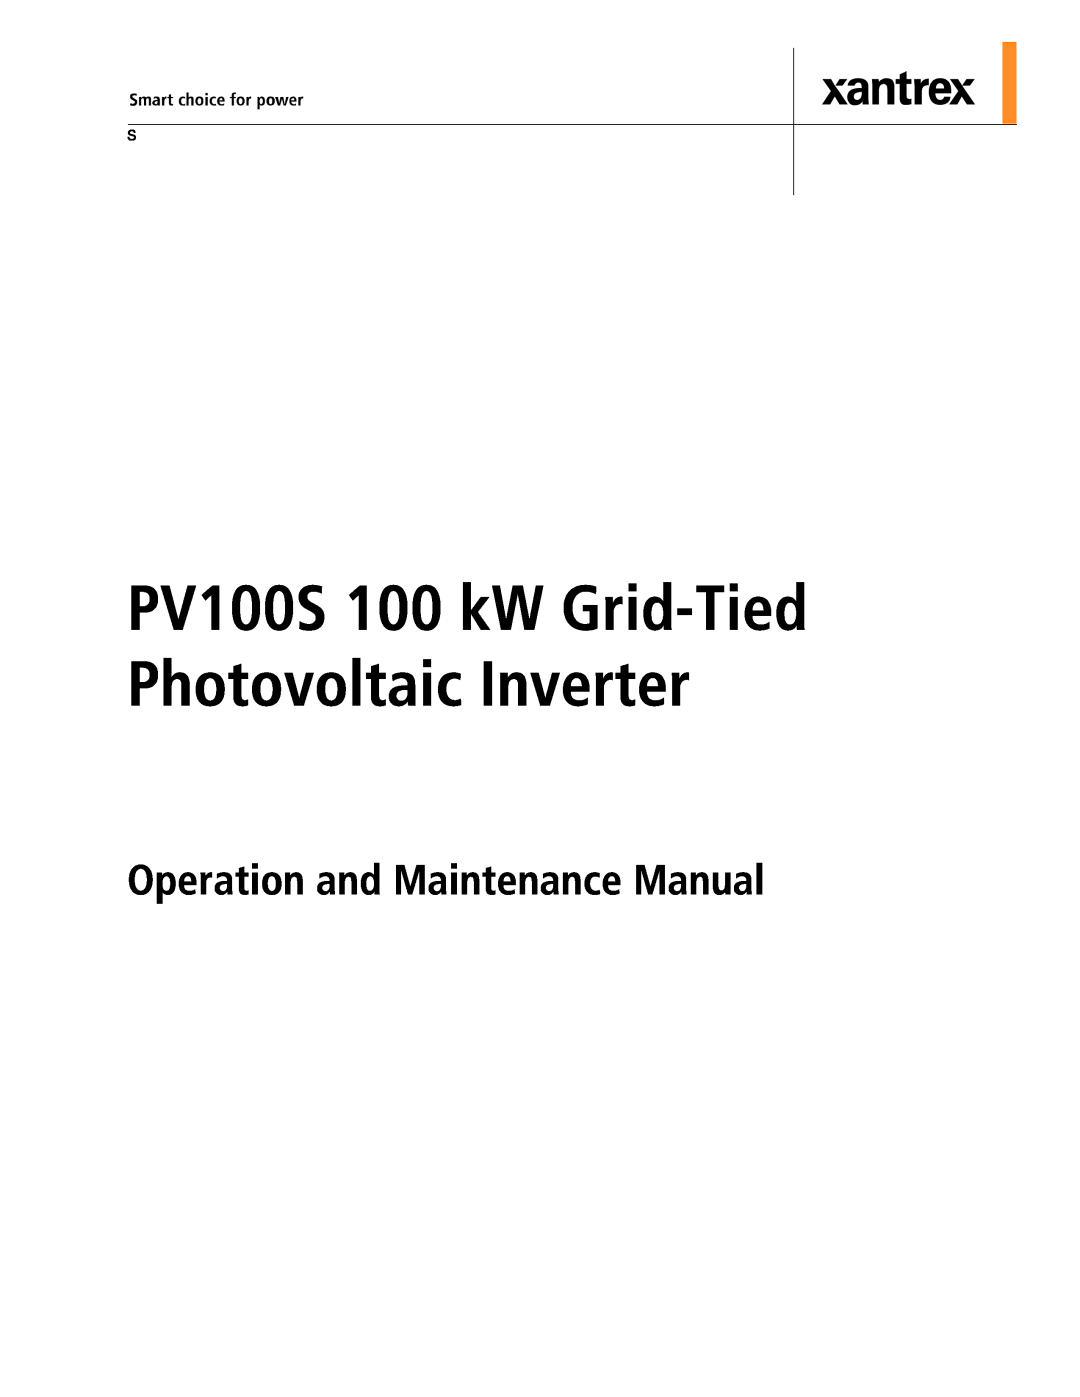 Xantrex Technology PV100S-208 manual Operation and Maintenance Manual, PV100S 100 kW Grid-Tied Photovoltaic Inverter 